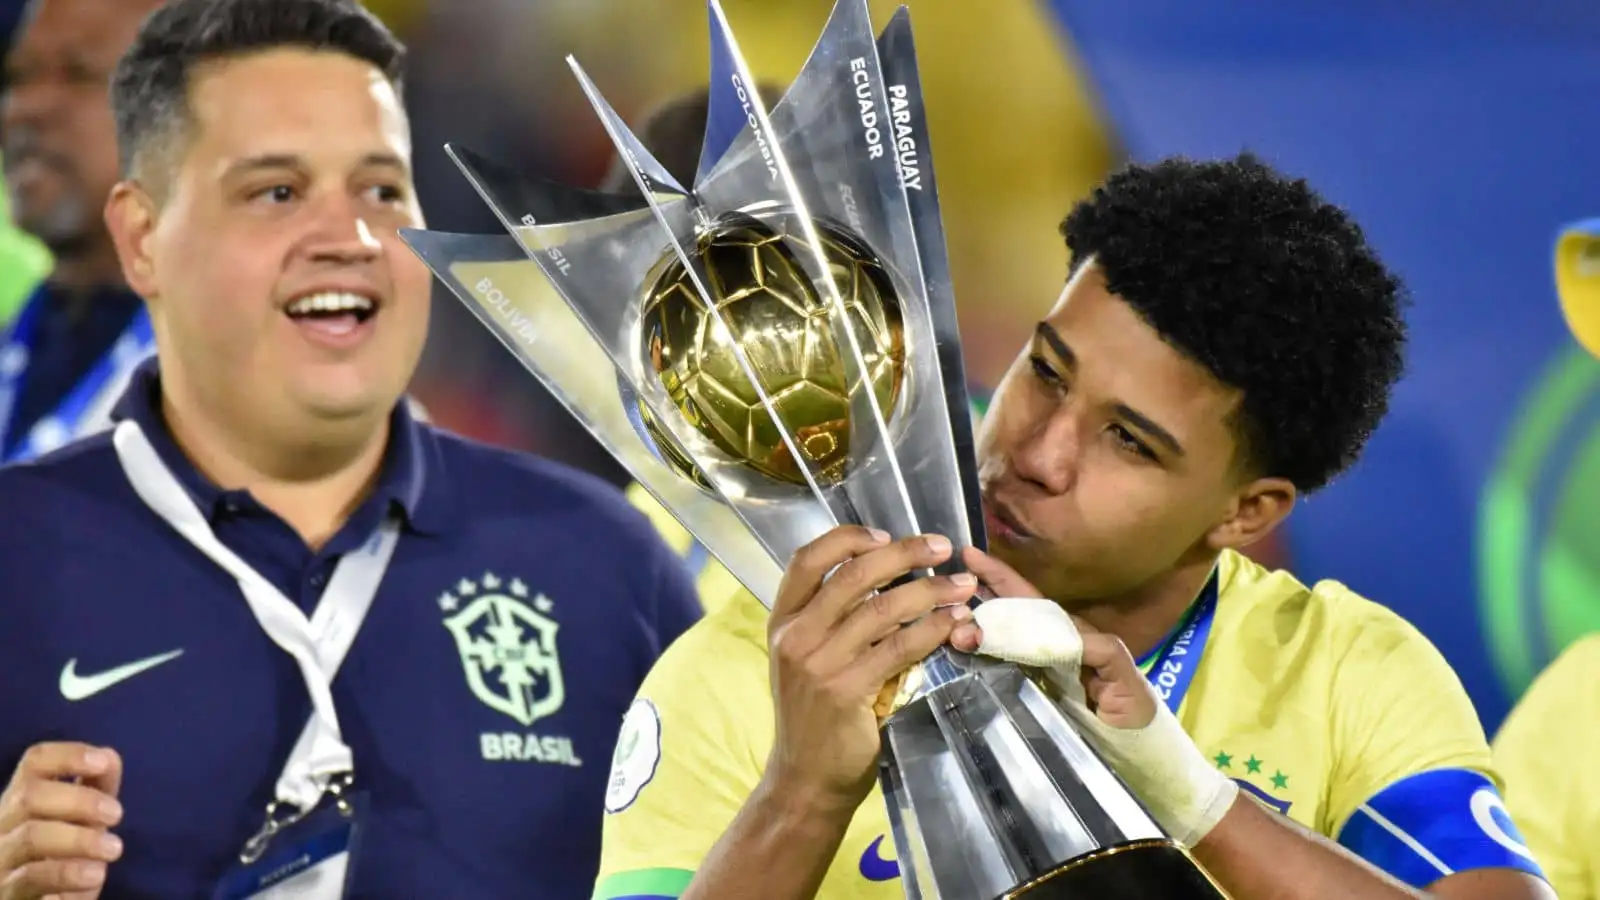 Brazil's Andrey Santos kisses the champions trophy after winning the South American U-20 Conmebol Tournament match between Brazil and Uruguay